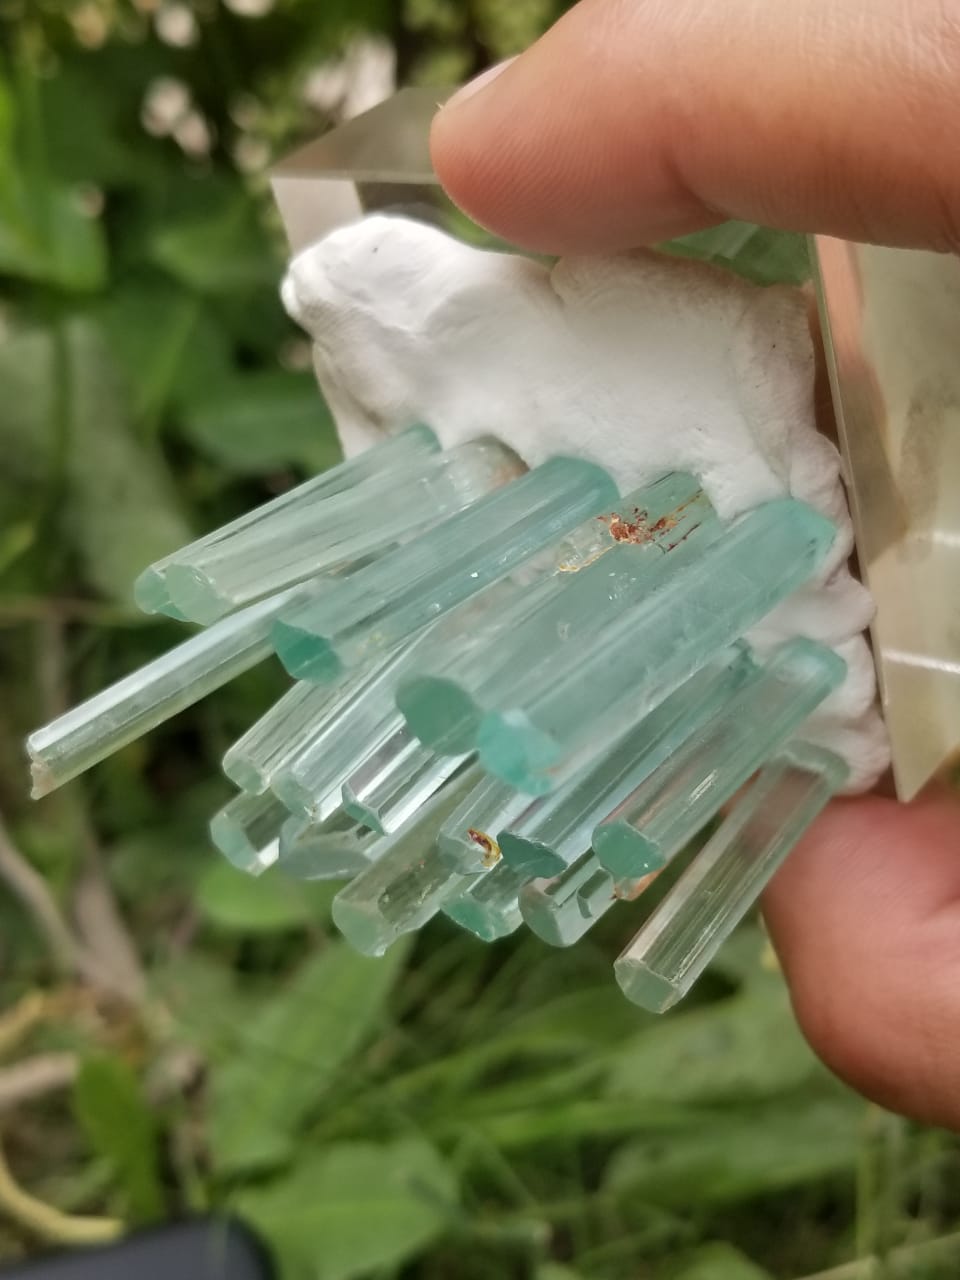 Aquamarine crystals Pencils available for sale